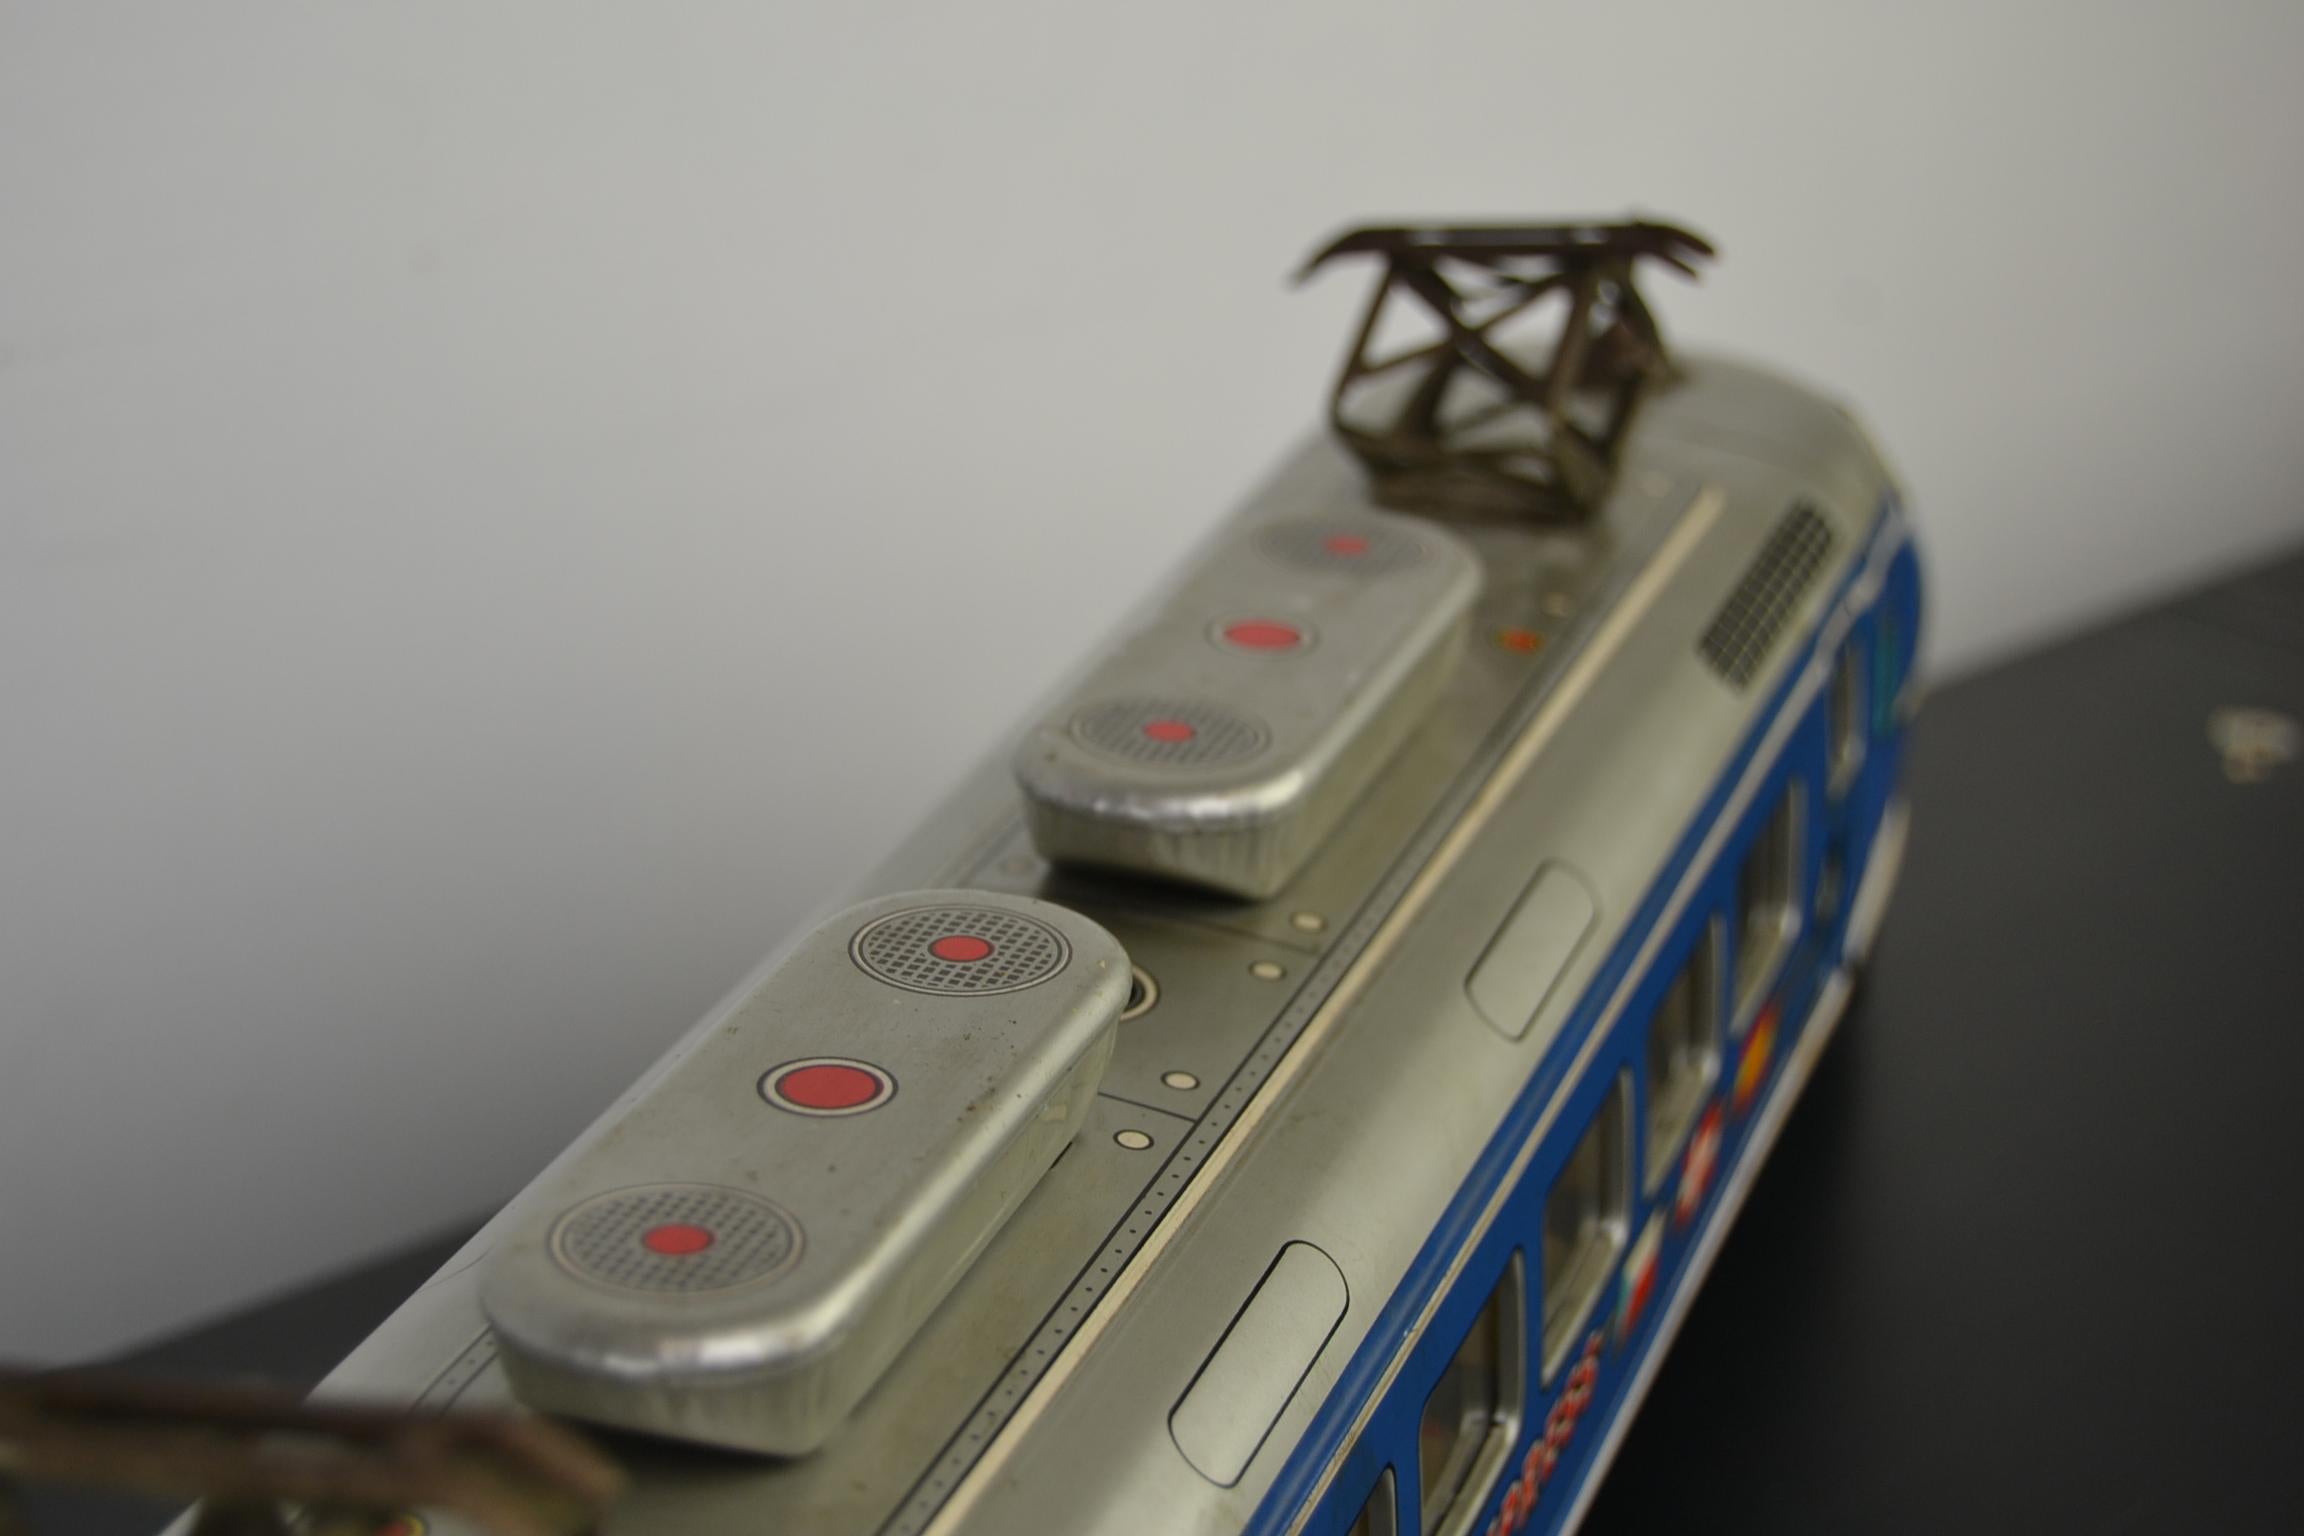 Large Tin Friction Drive, Express Train Toy by ATC, Japan, 1950s 1